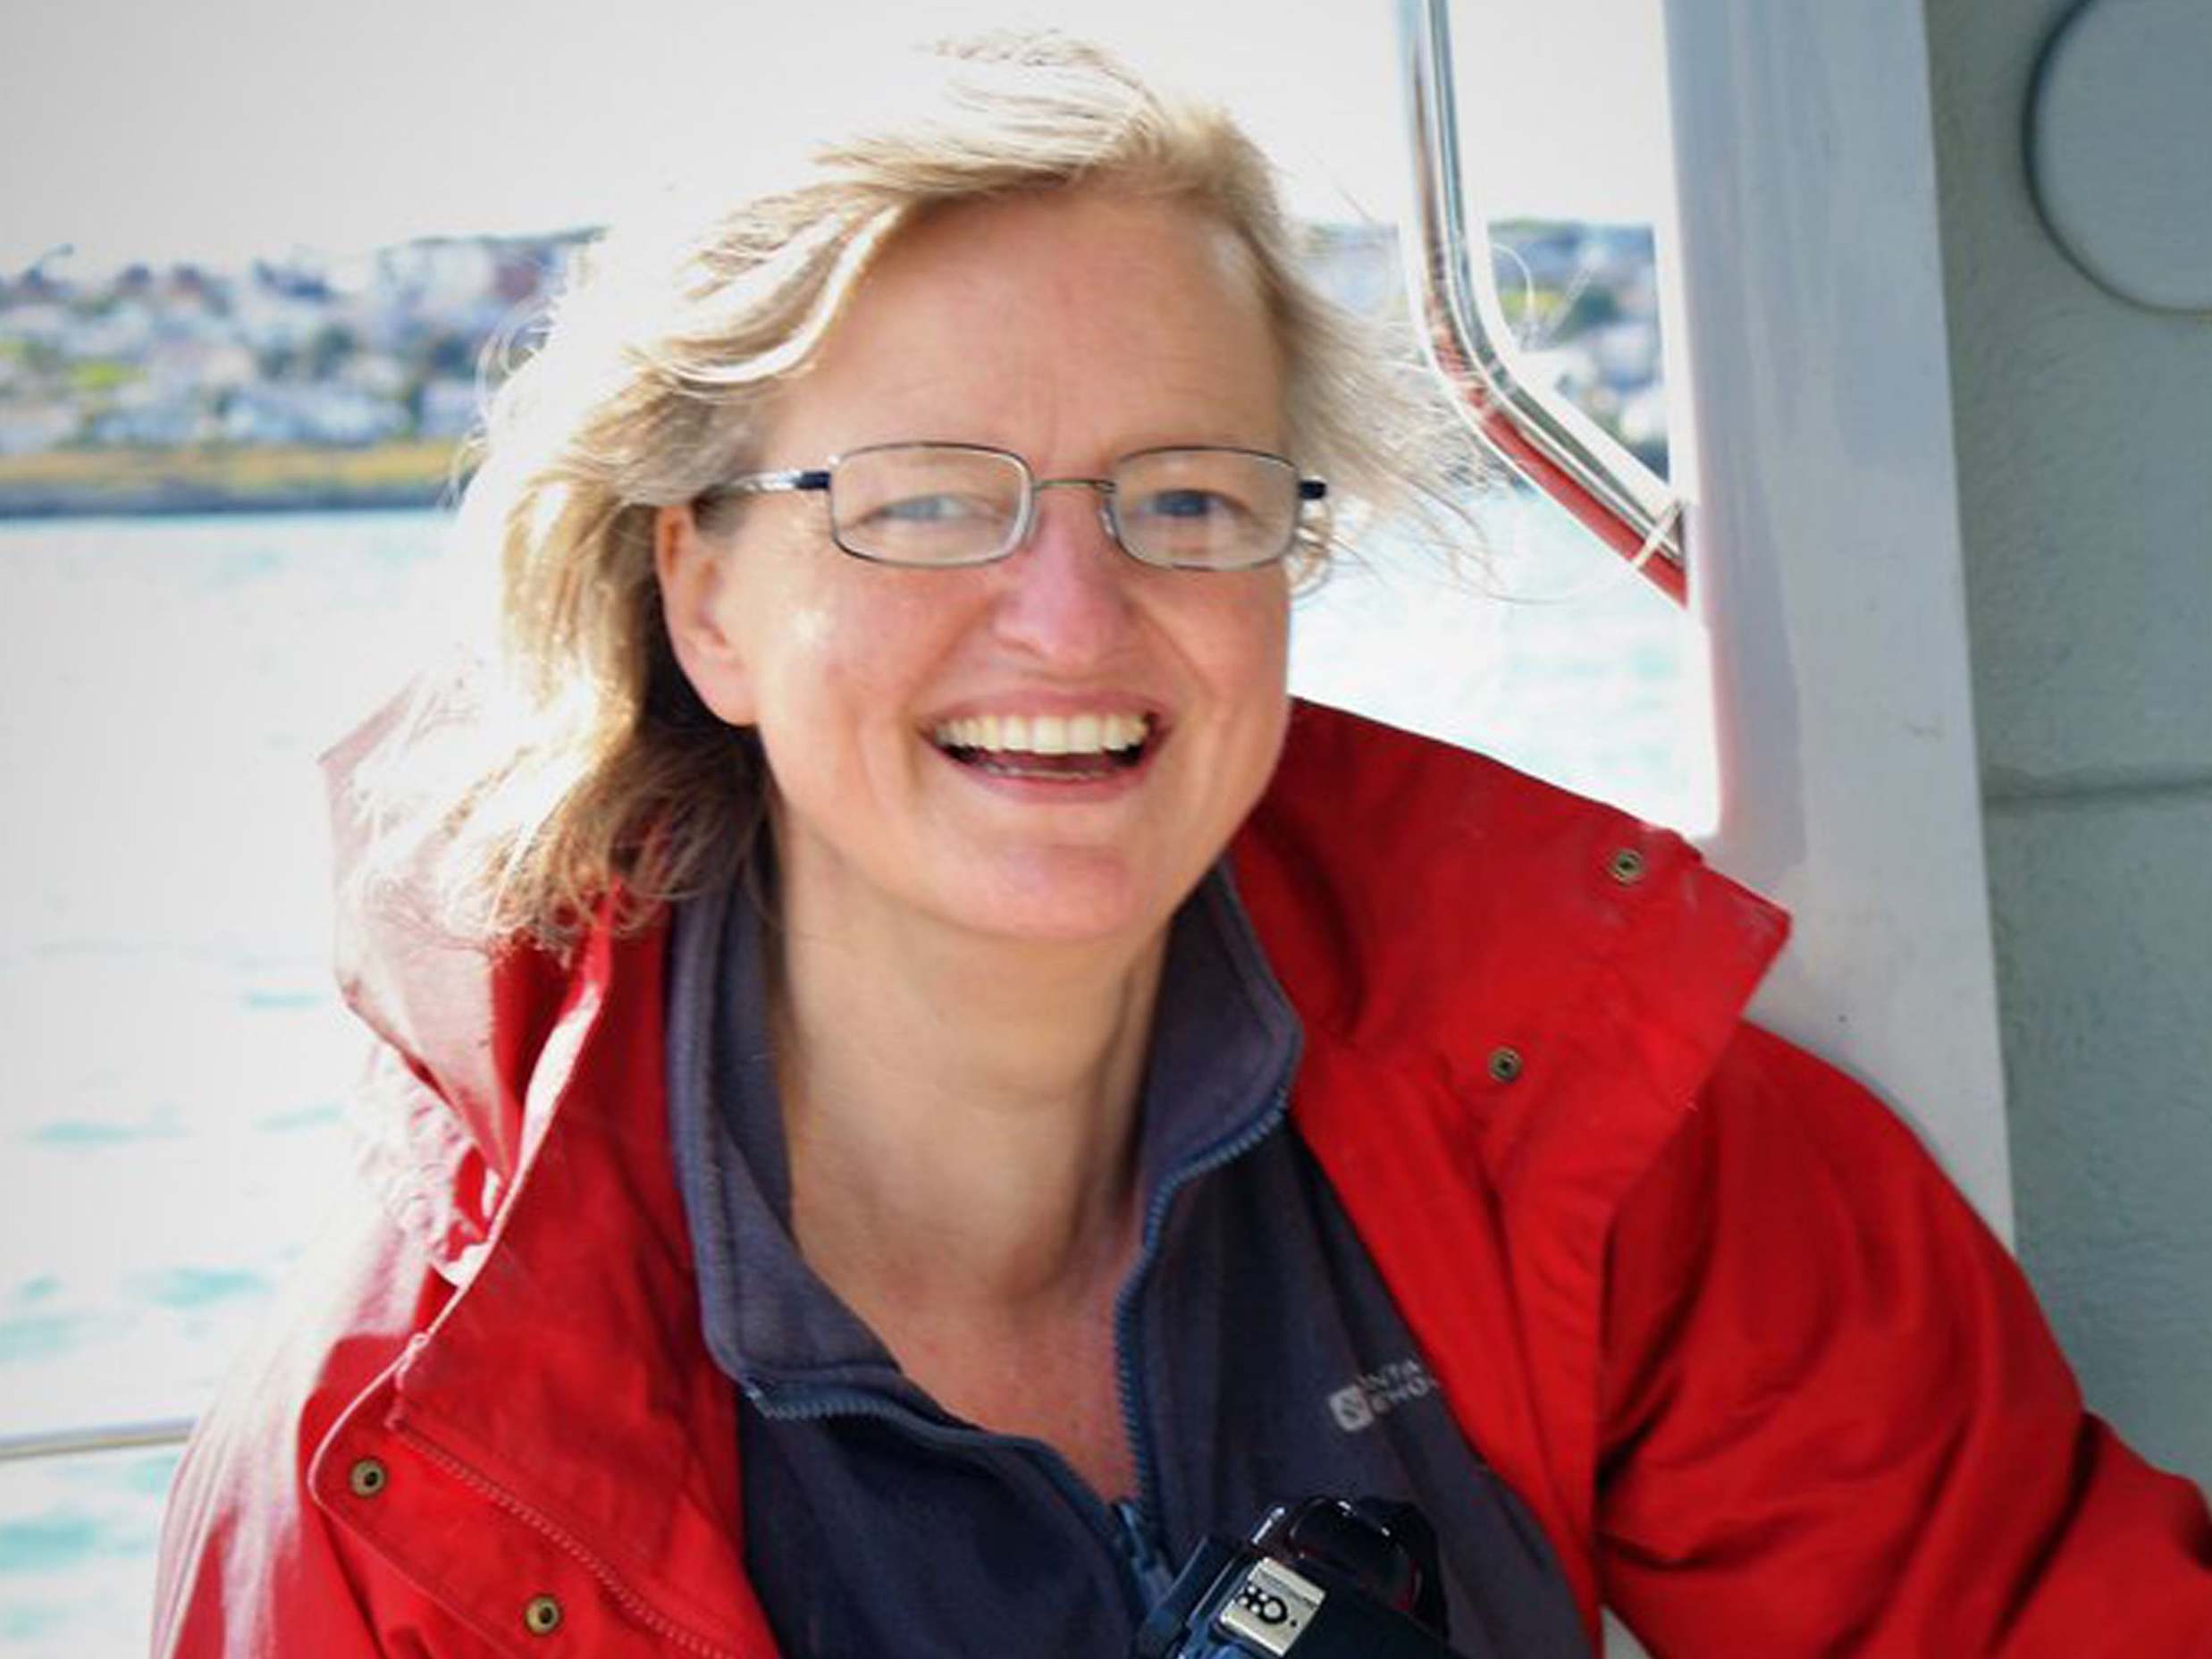 Undated handout photo of Anna Evan, 46, who was killed after Jake Waterhouse, 27, drove over her tent while she slept at a campsite near Bethel, in North Wales, August 2019.